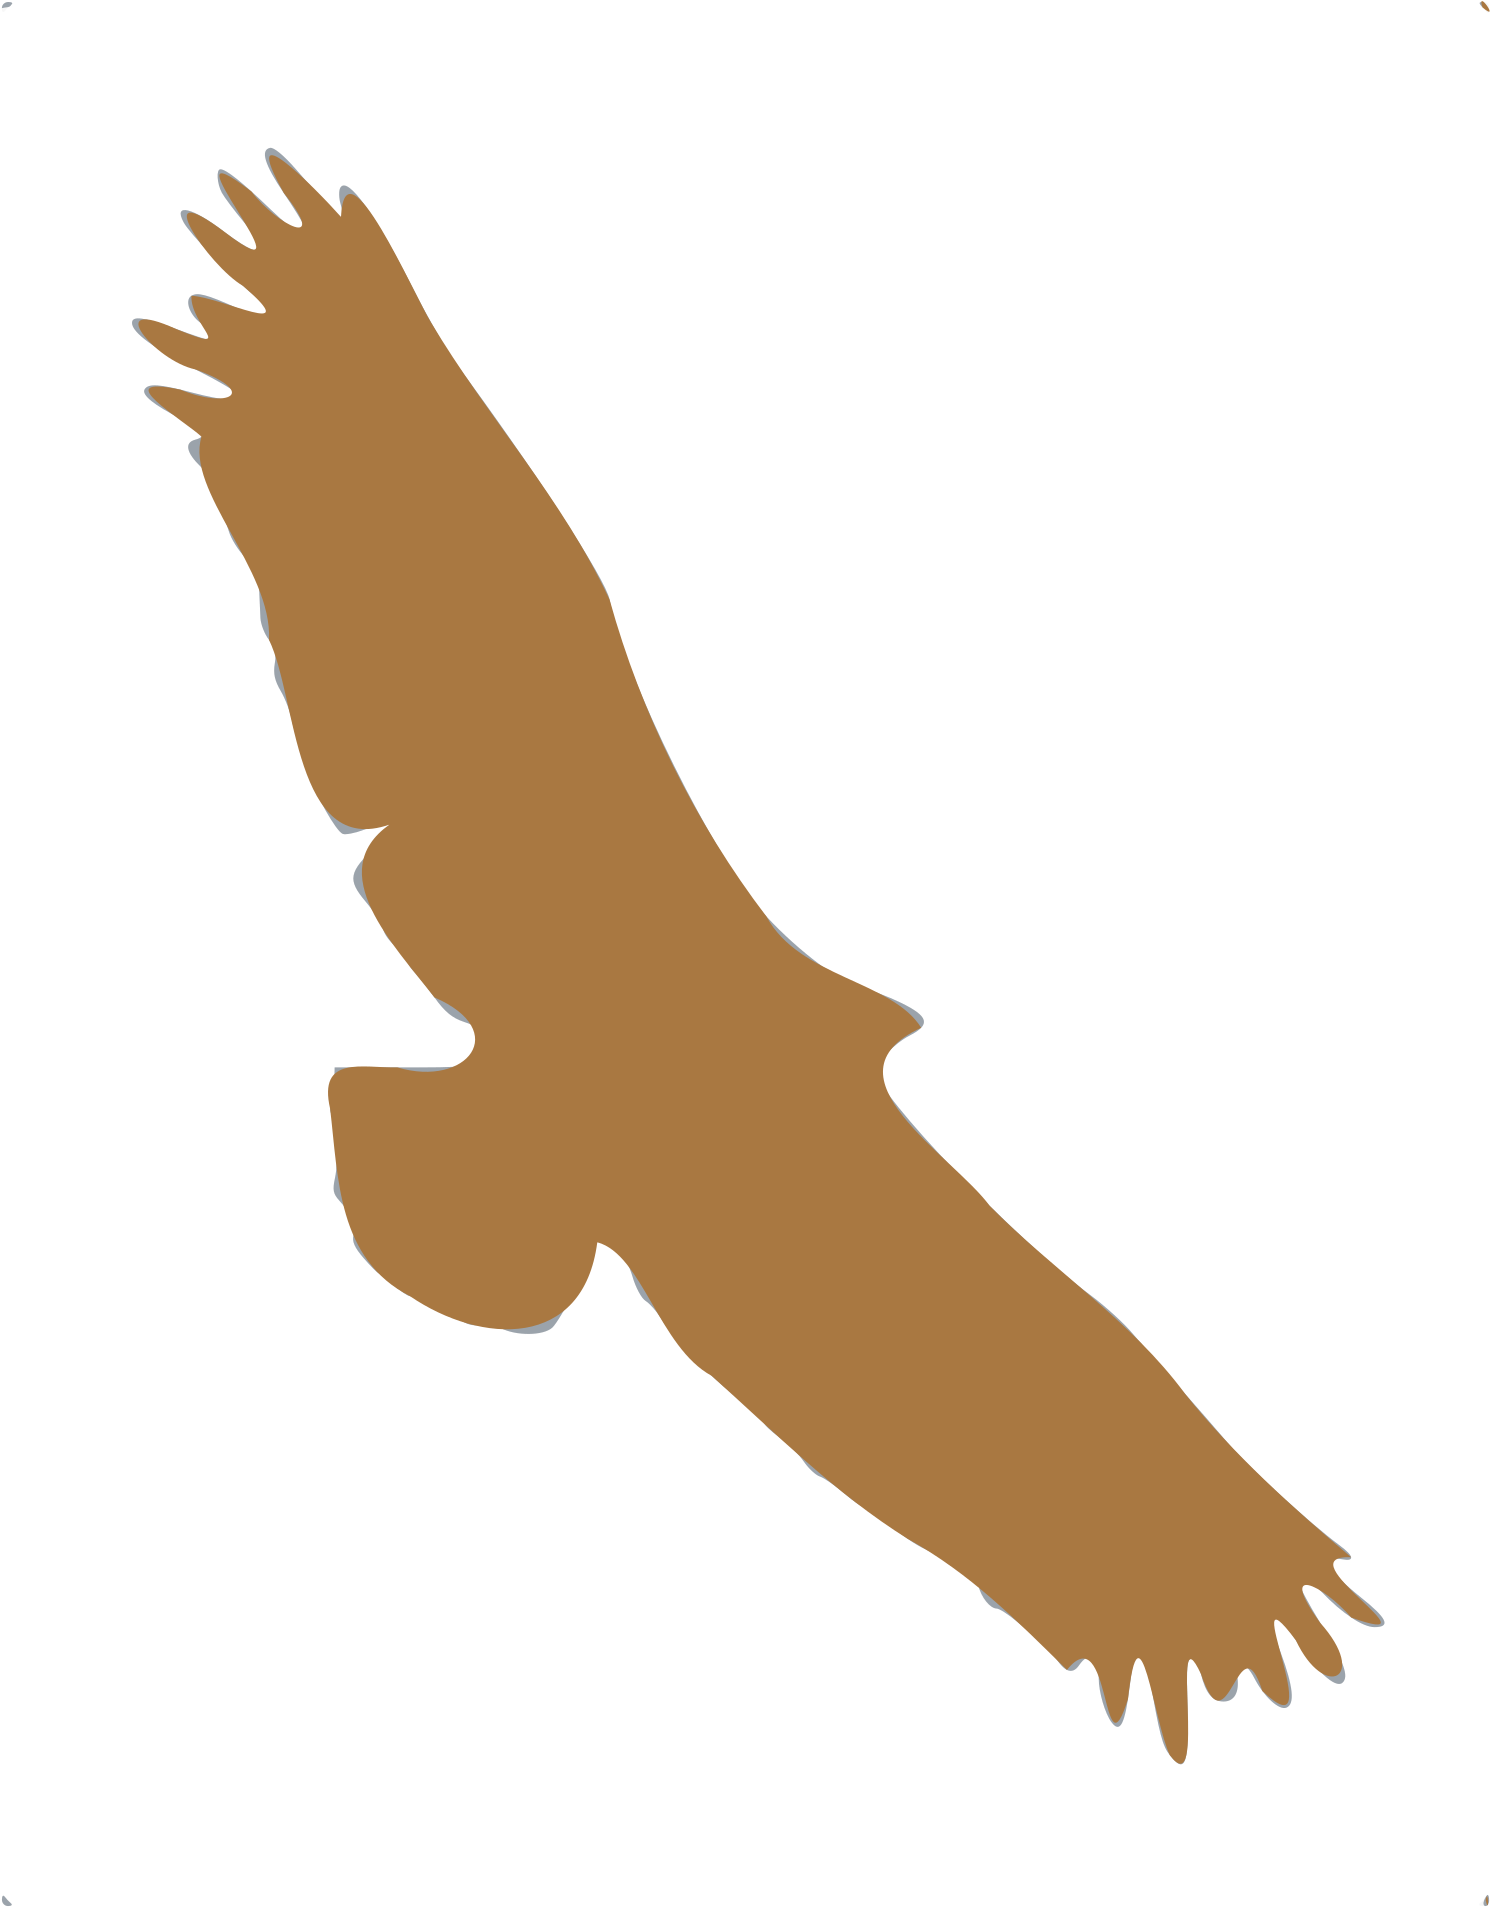 Silhouette Animaux 05 - Golden Eagle (1983x2400)